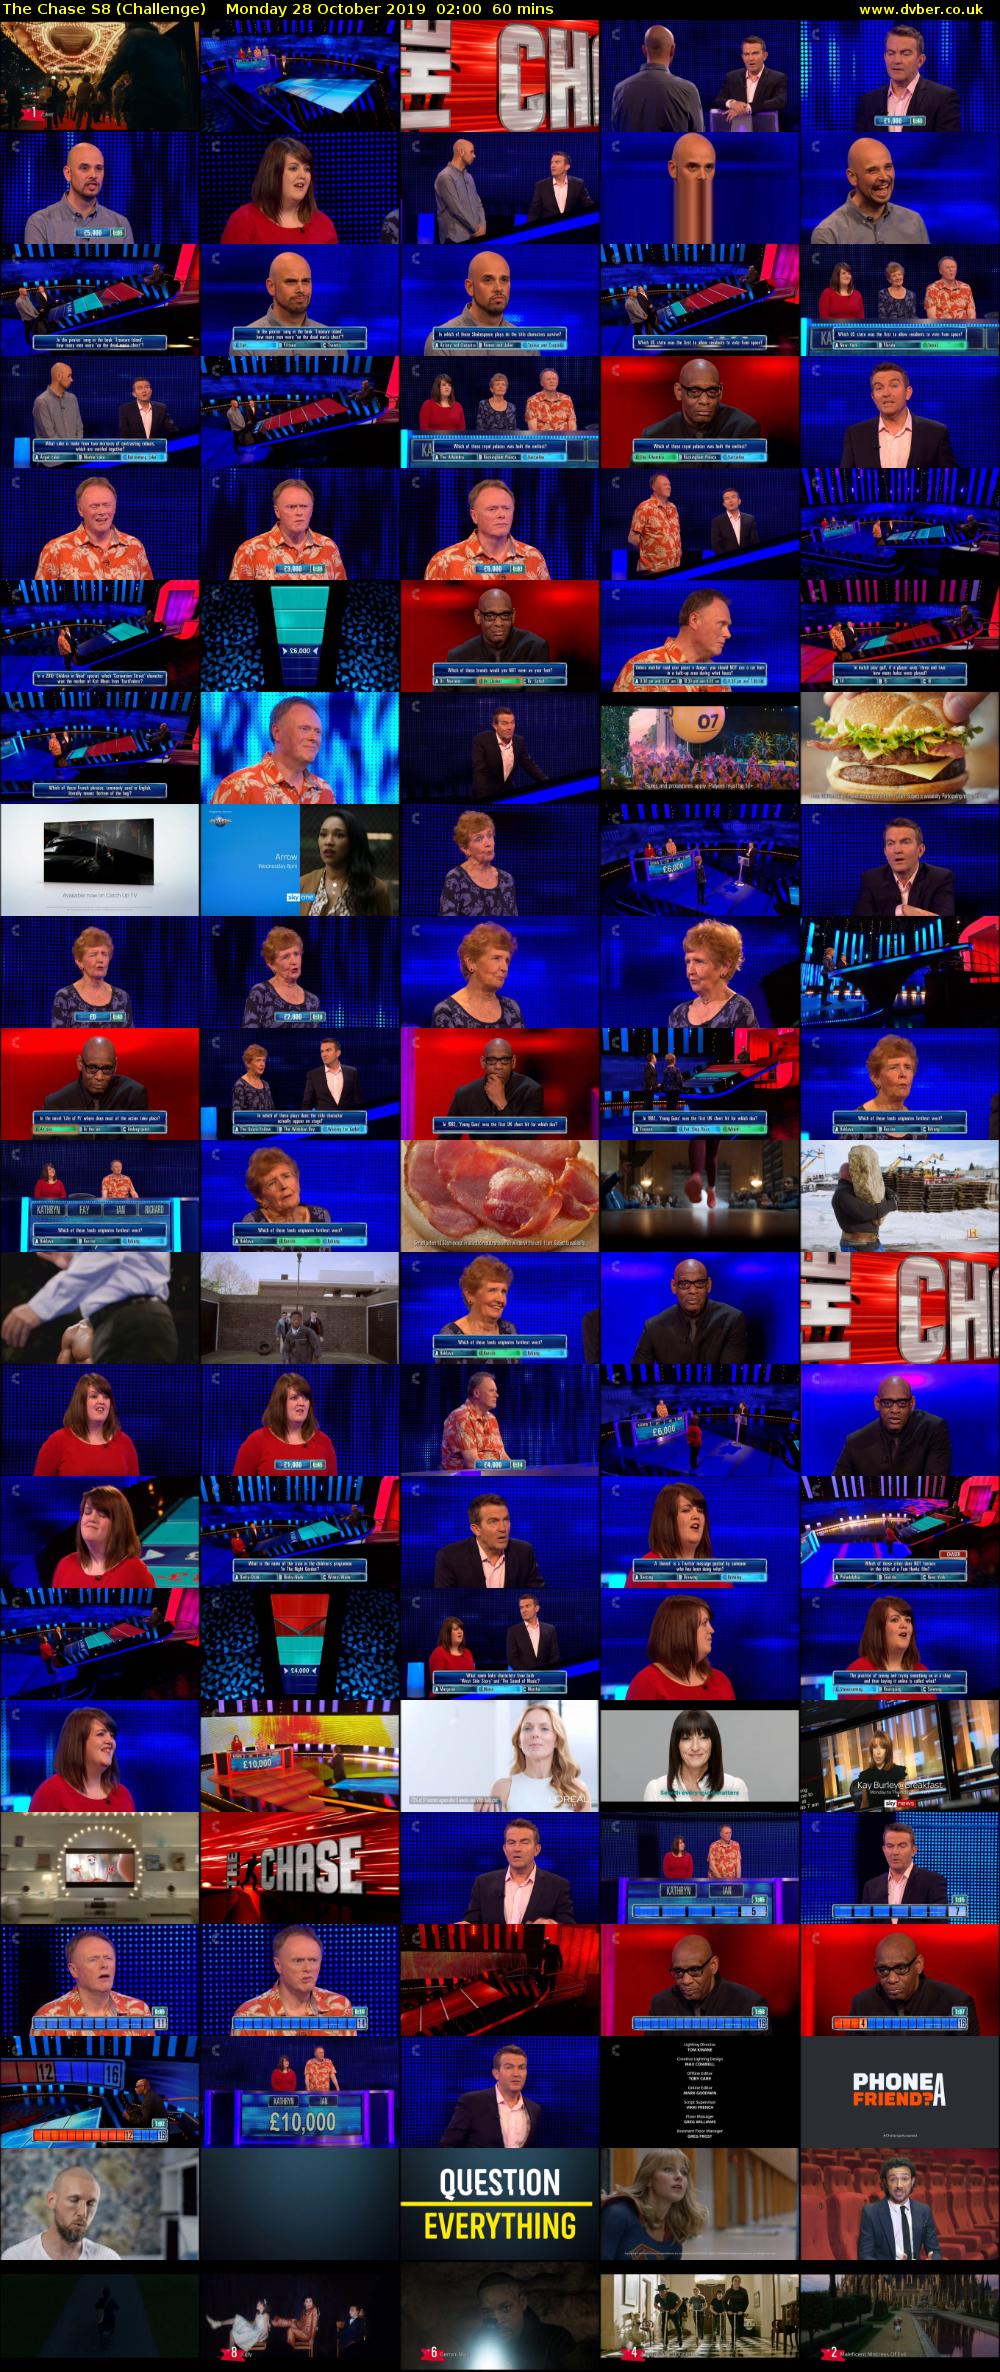 The Chase S8 (Challenge) Monday 28 October 2019 02:00 - 03:00